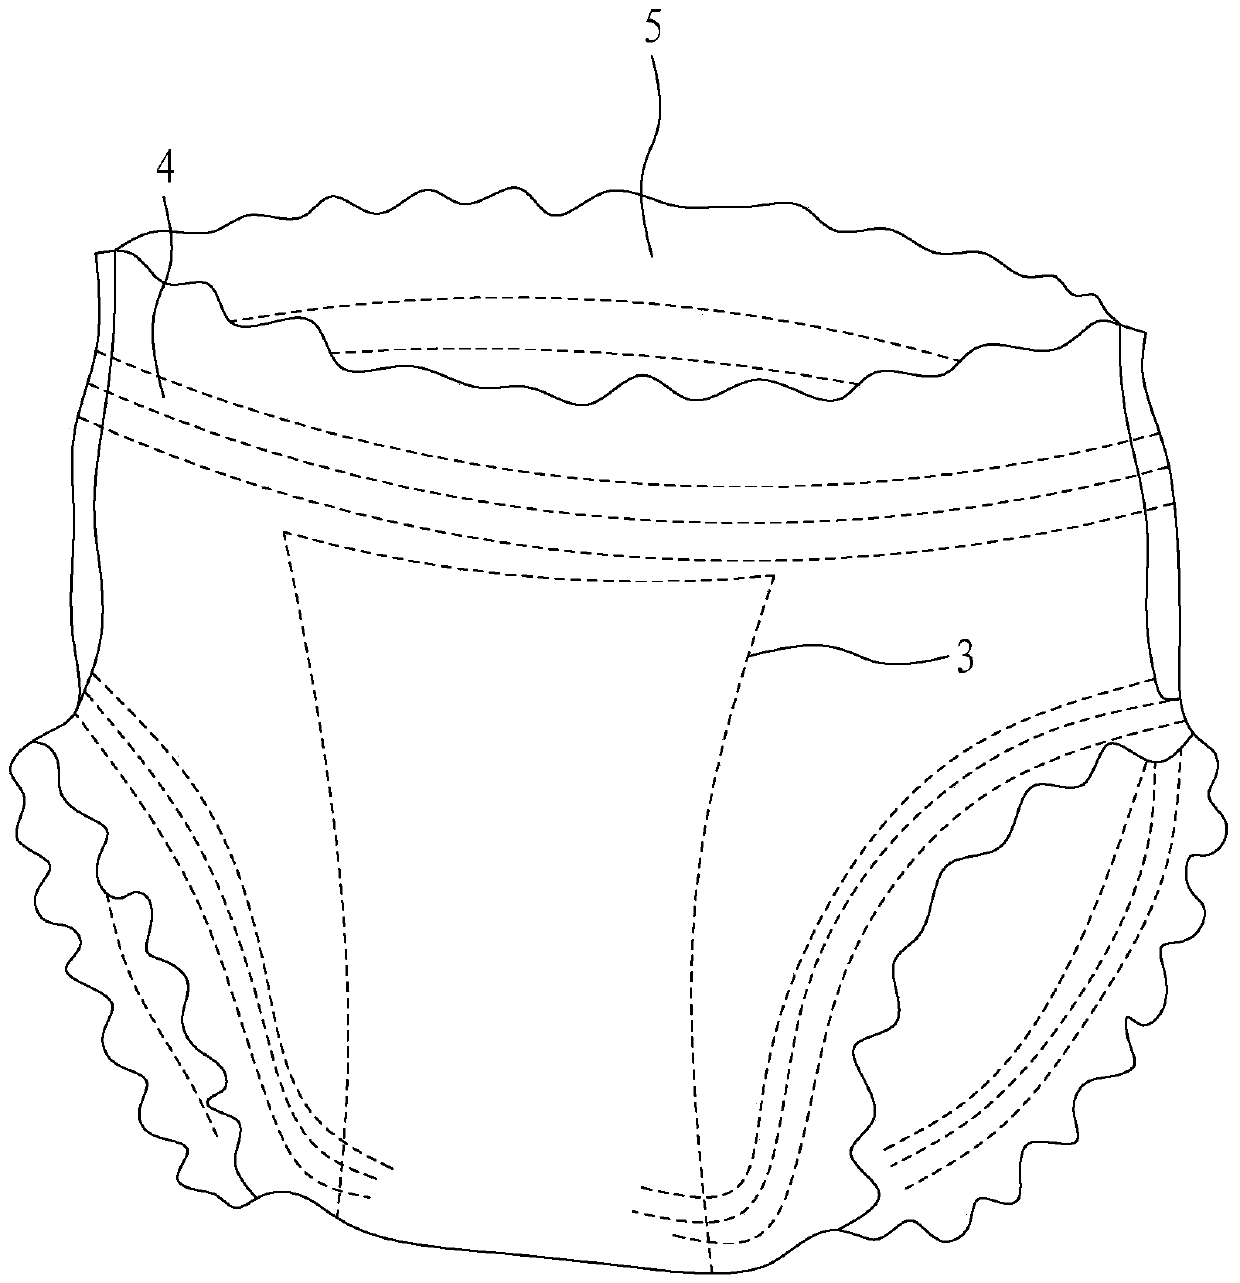 Composite elastic waistline pull up diaper and manufacturing technology thereof